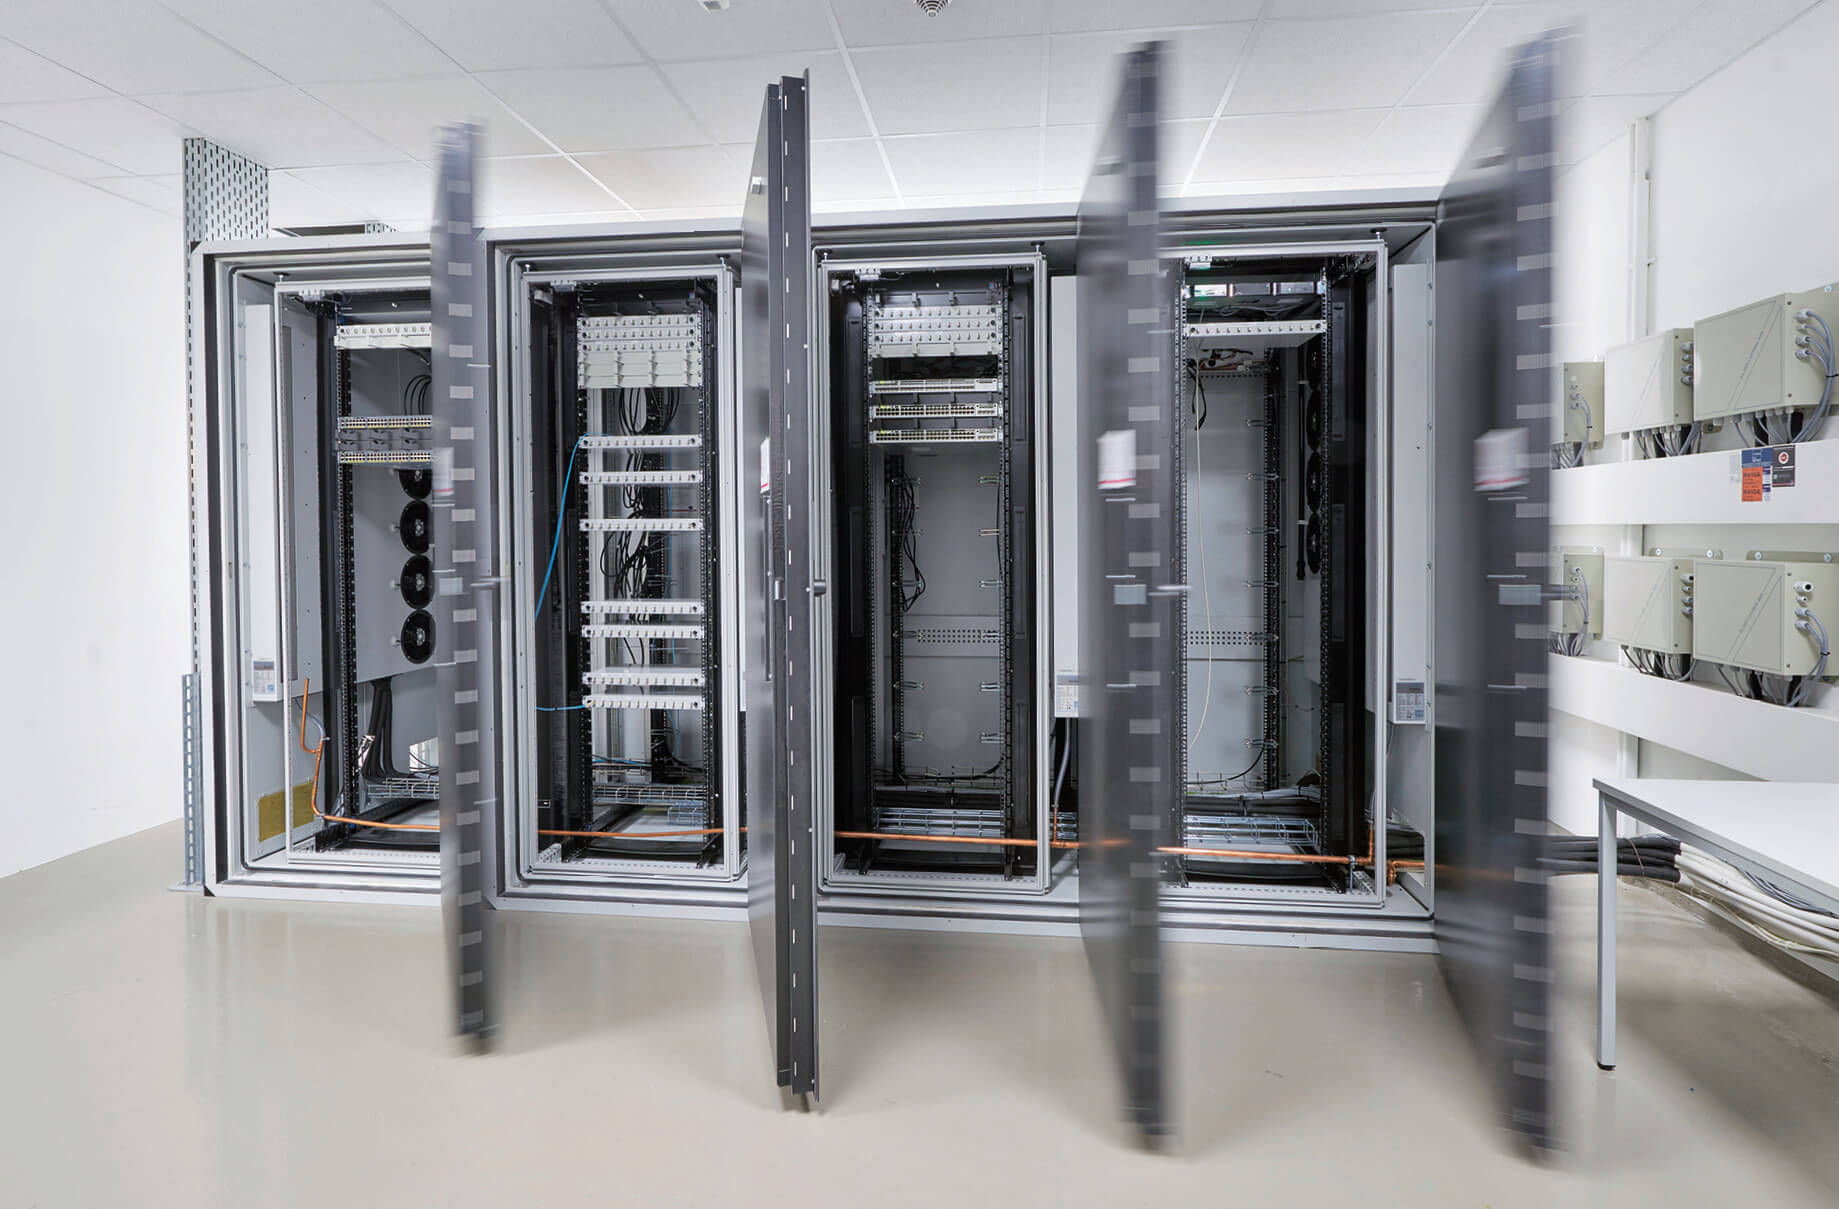 Integrated protection systems-The Rittal Micro Data Center is basically a data safe. The compact data center contains all the relevant equipment and is housed in a protective enclosure. This provides a high level of protection against potential physical threats to IT. The protection concept is suitable for one or – as in the case of B. Braun – more server rack solutions and thus perfectly suits the requirements of SMEs.